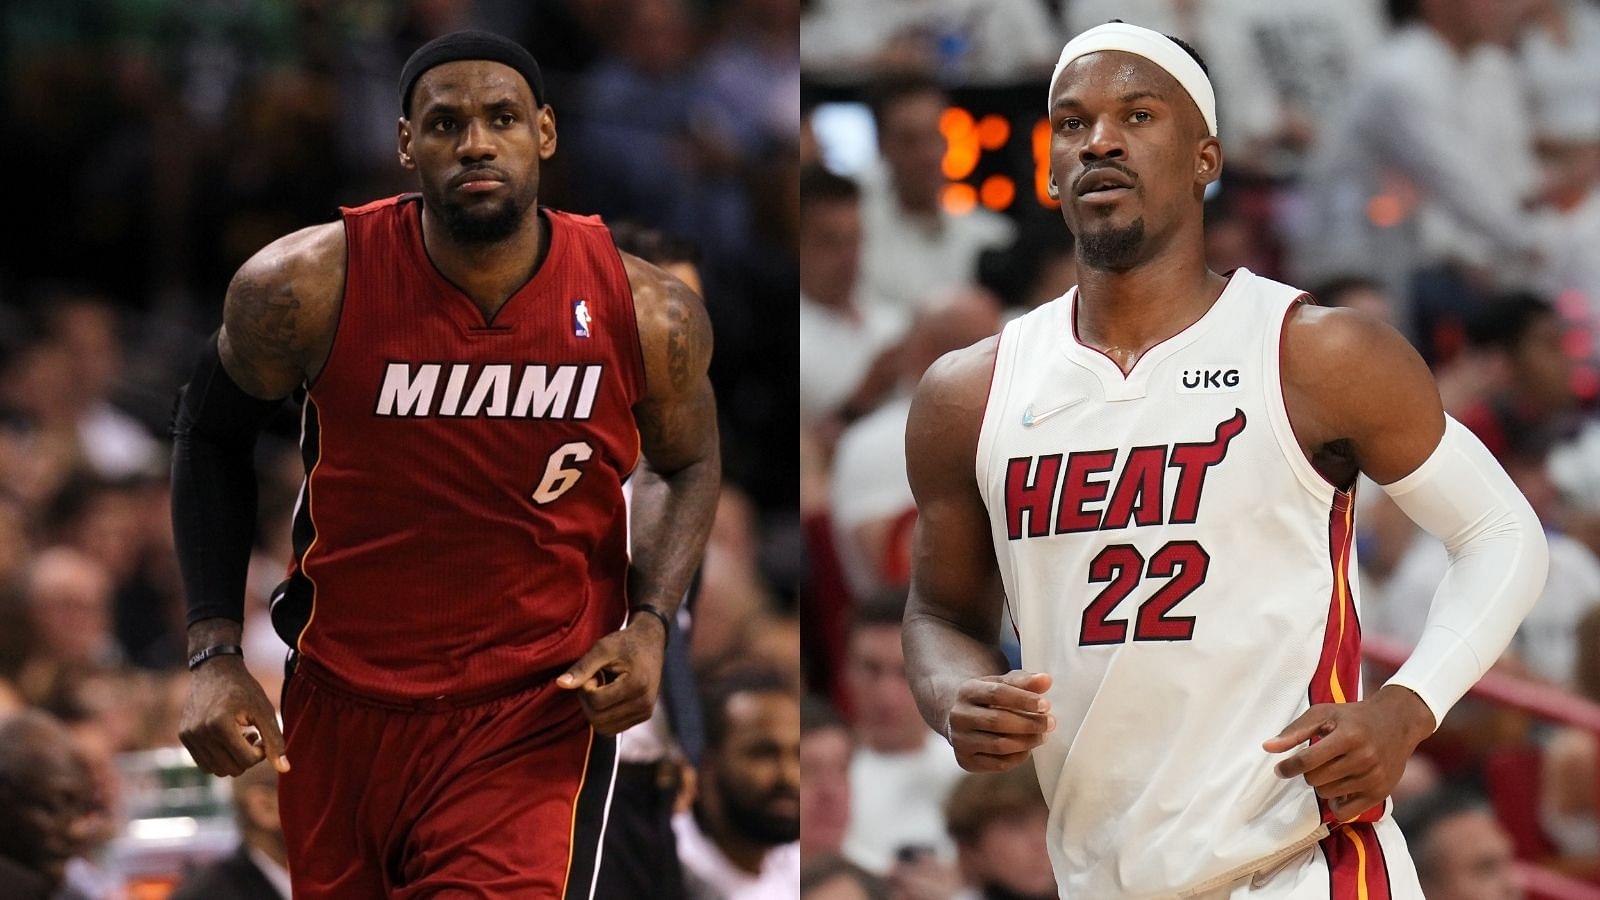 "Jimmy Butler surpassed LeBron James for a big record when facing elimination in a Conference Finals": The Heat star is breaking several NBA and franchise record